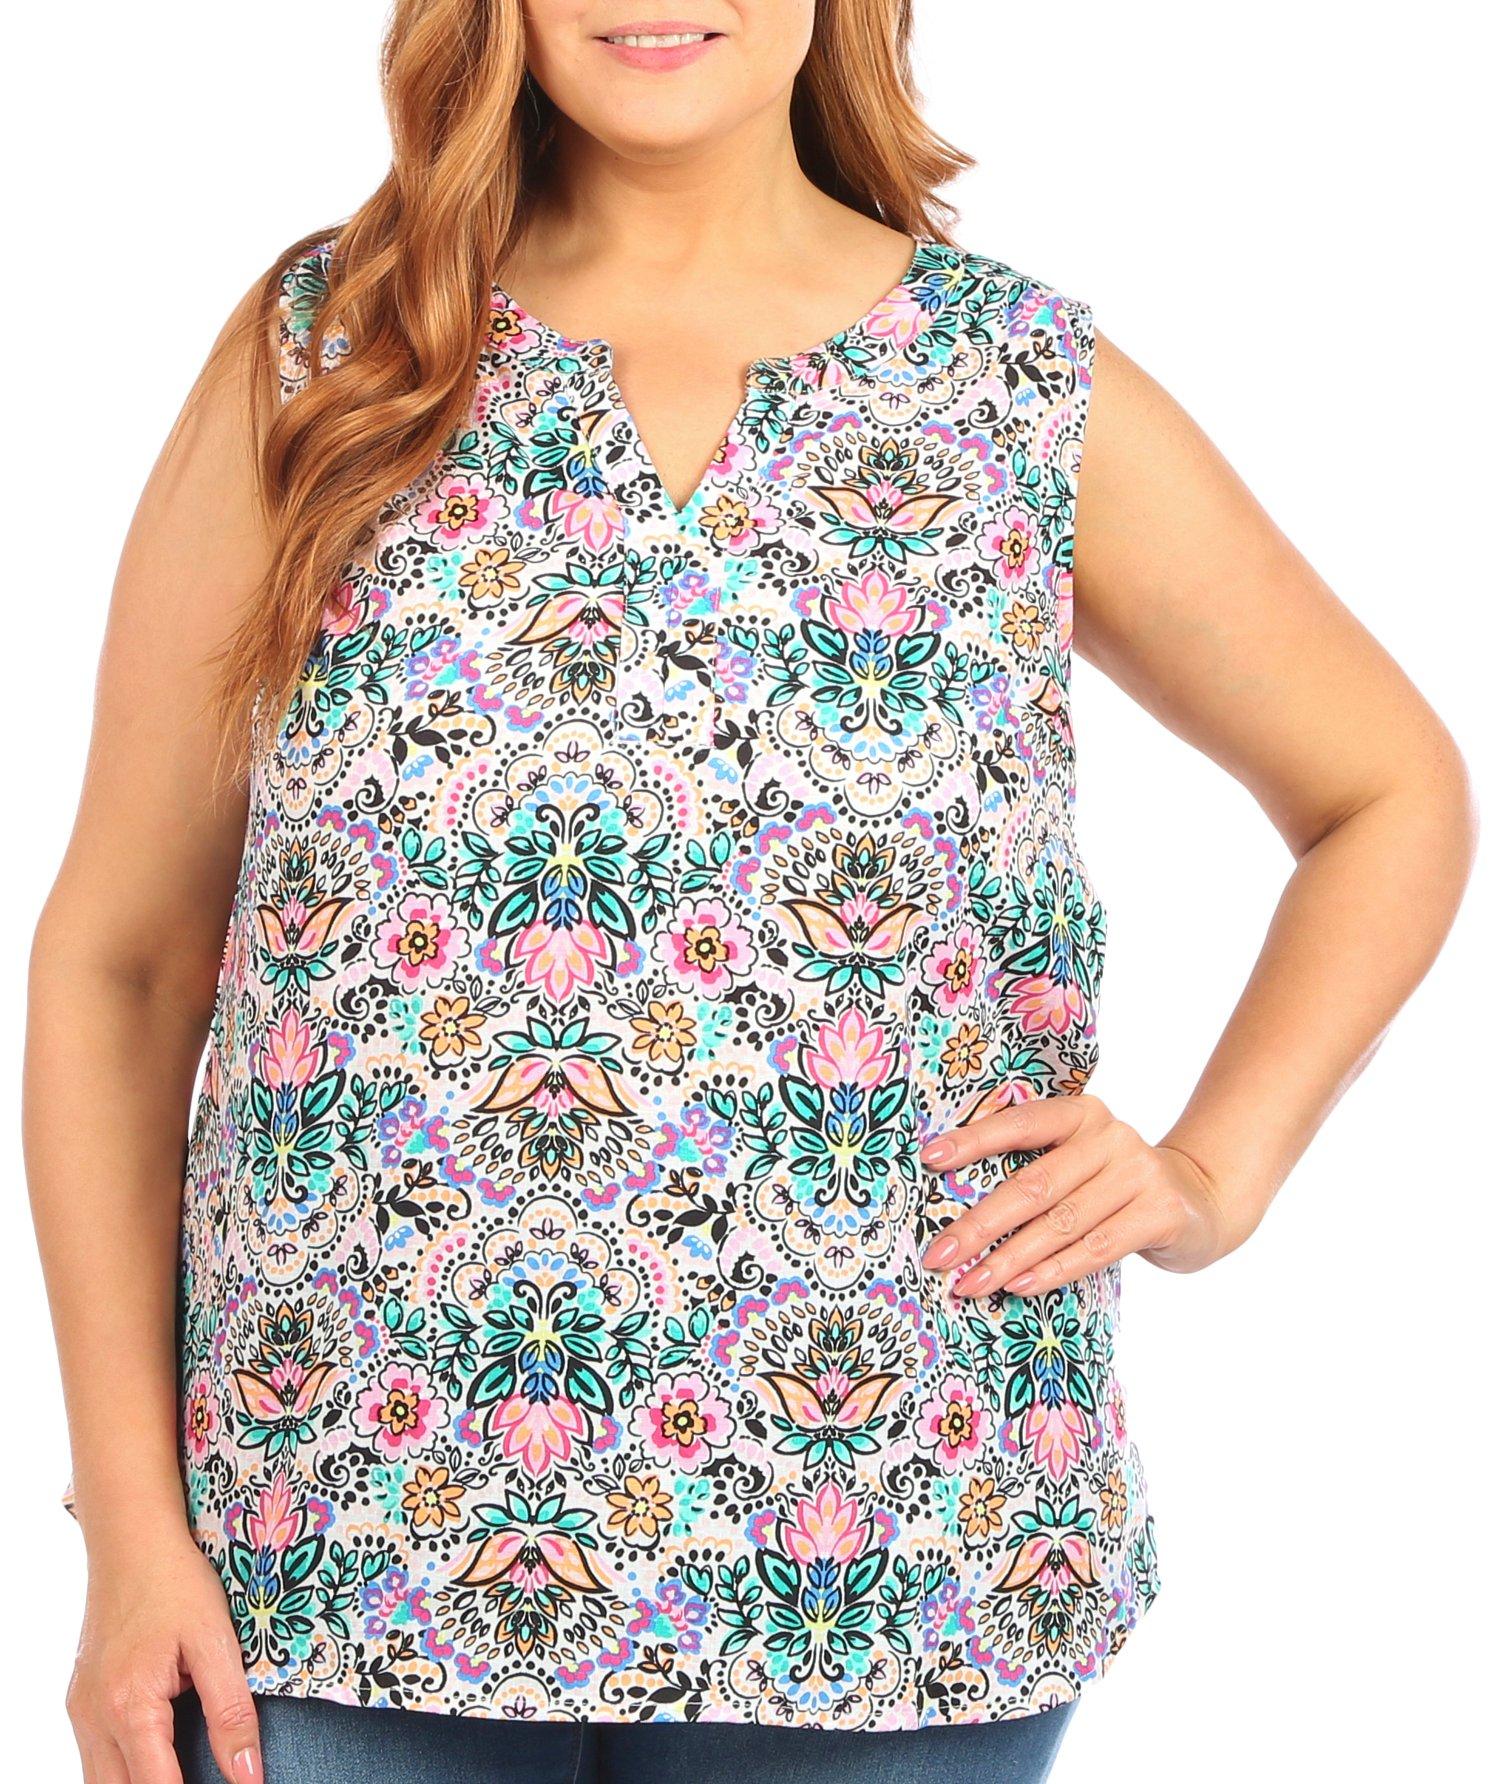 Coral Bay Plus Floral Print Sleeveless Top